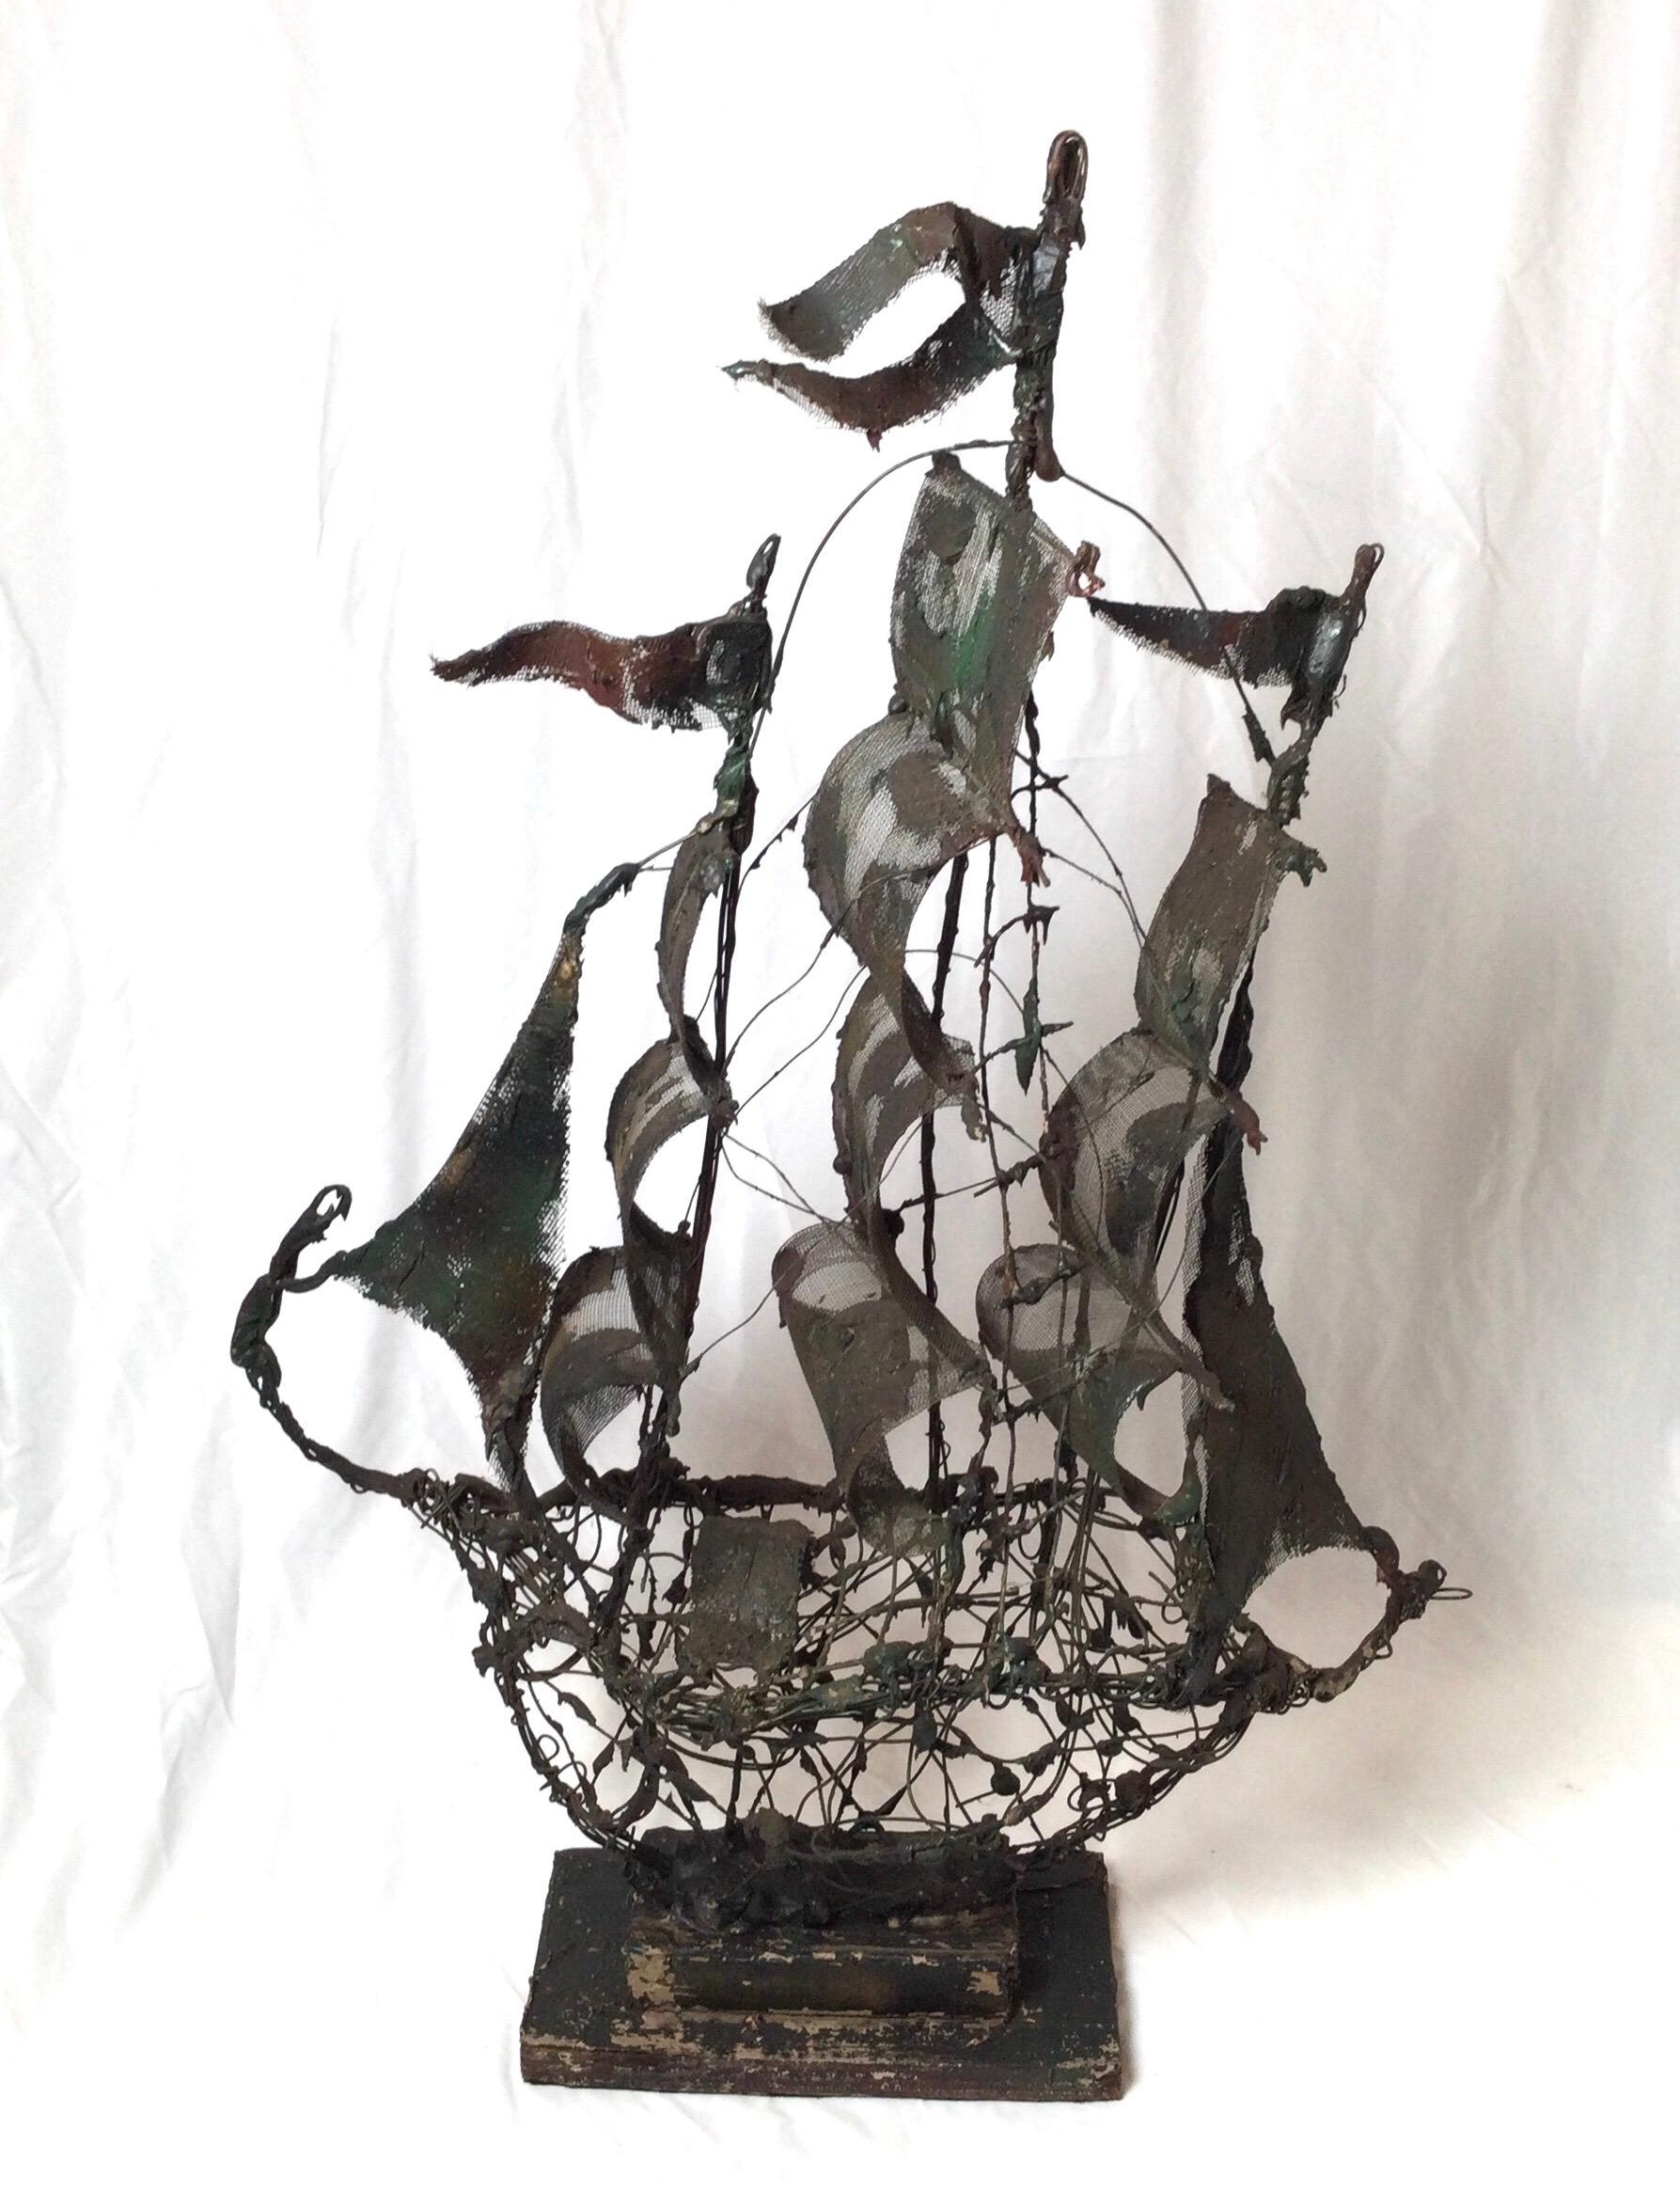 A freestanding 3 masted schooner with elaborate styling. metal, wood and wire. The aged and weather finish is intentional.